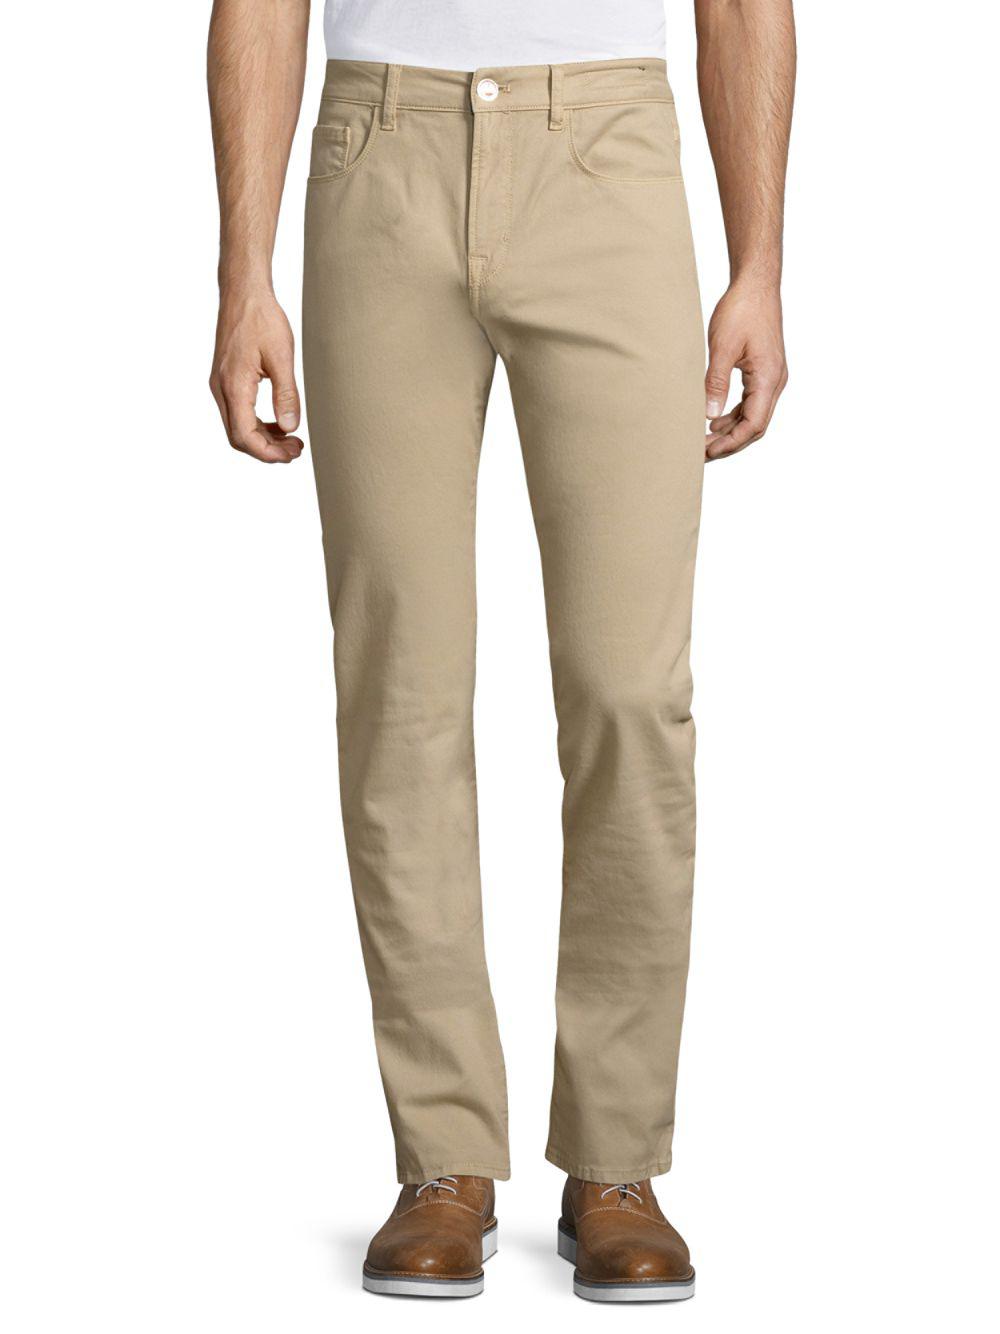 PT01 Lux Slim Stretch Pt05 Tricotine Jeans in Natural for Men - Lyst